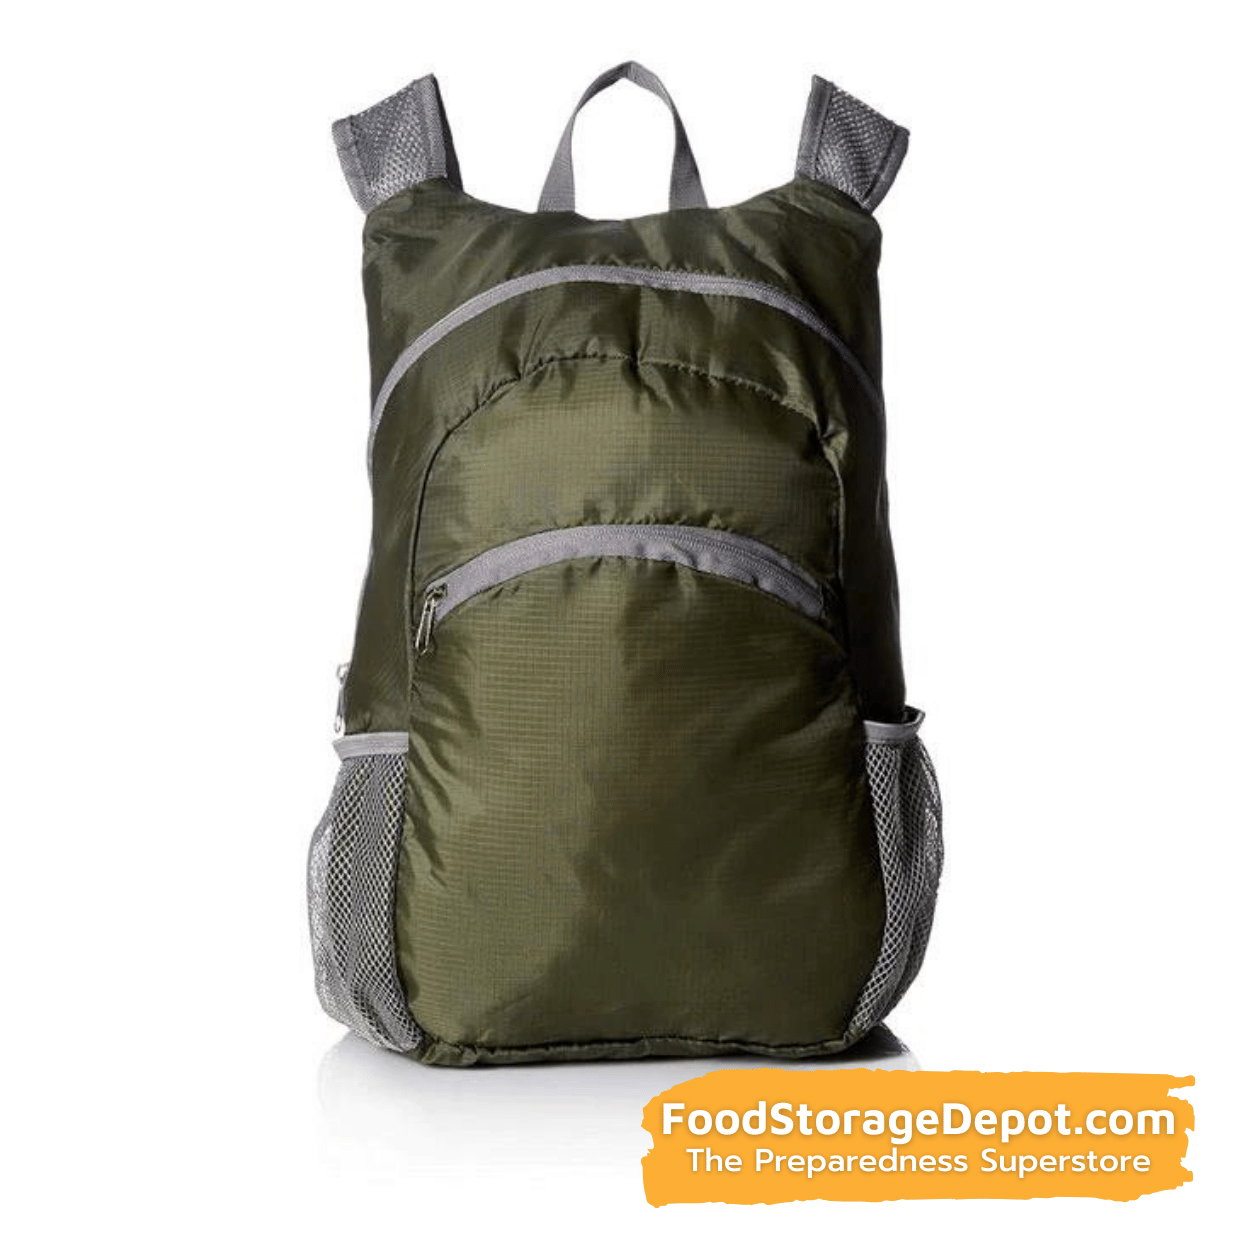 Lightweight Water Resistant Collapsible Backpack